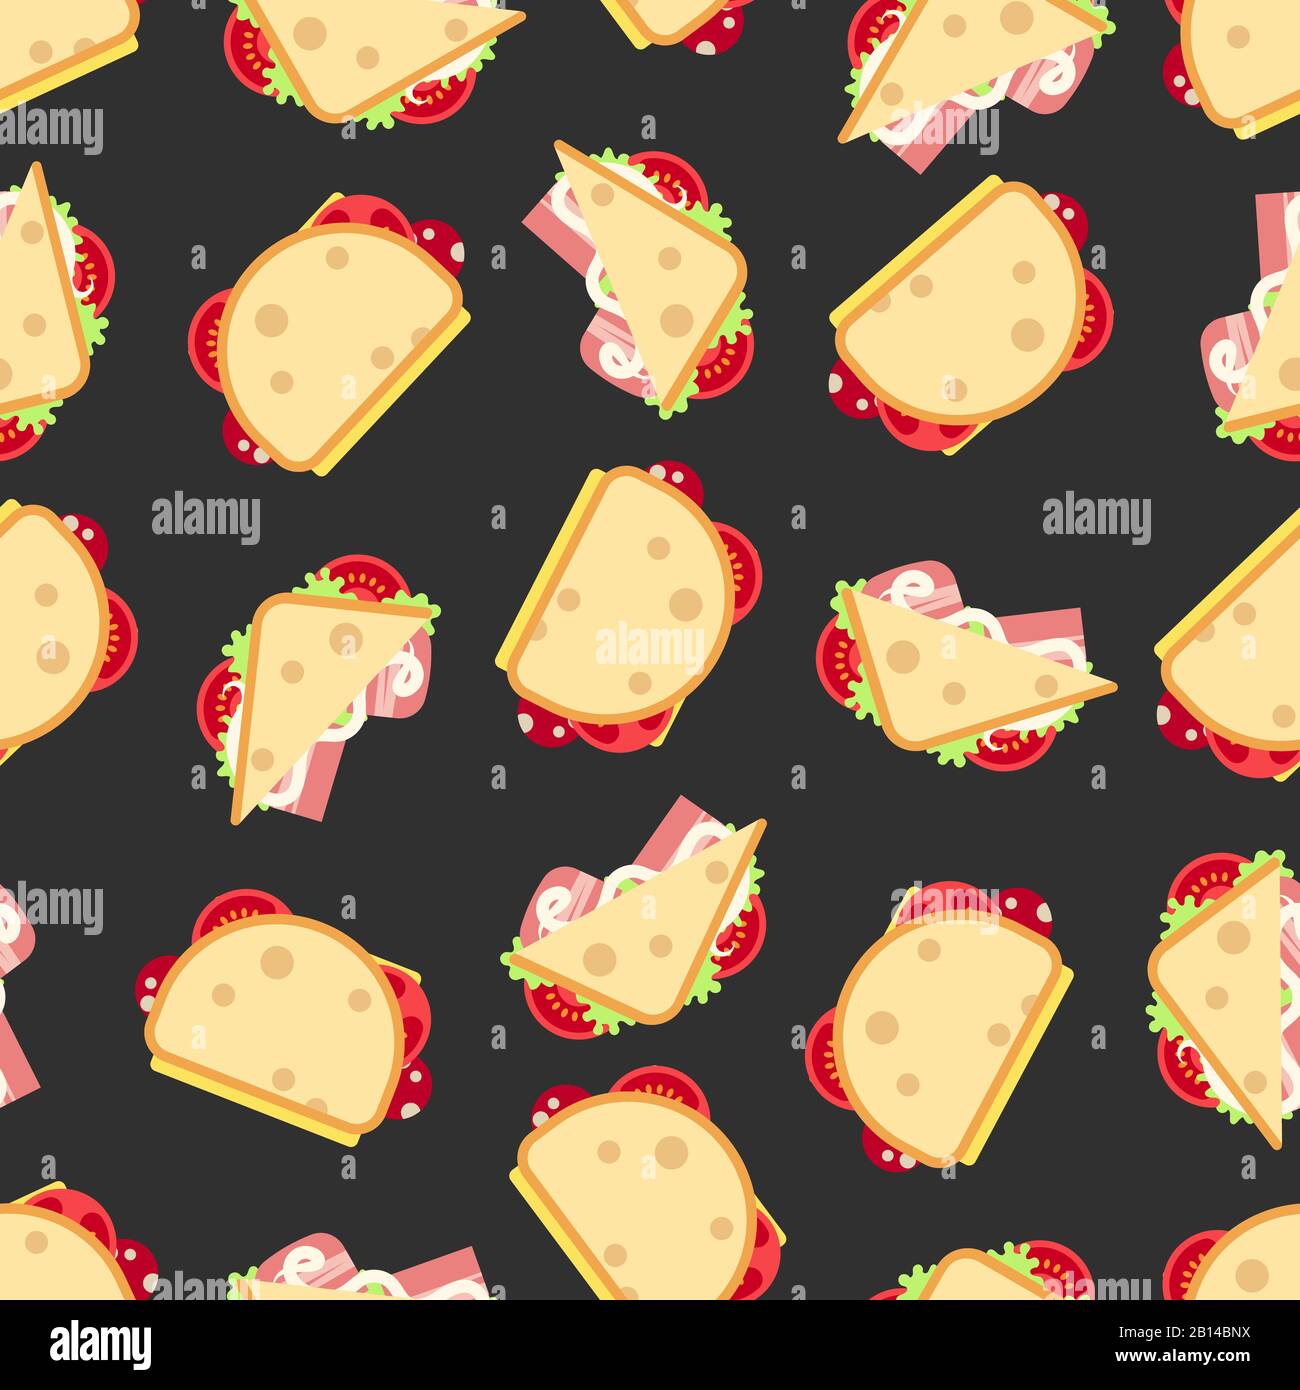 Sandwiches seamless pattern- fast food seamless texture. Background with hamburger, vector illustration Stock Vector